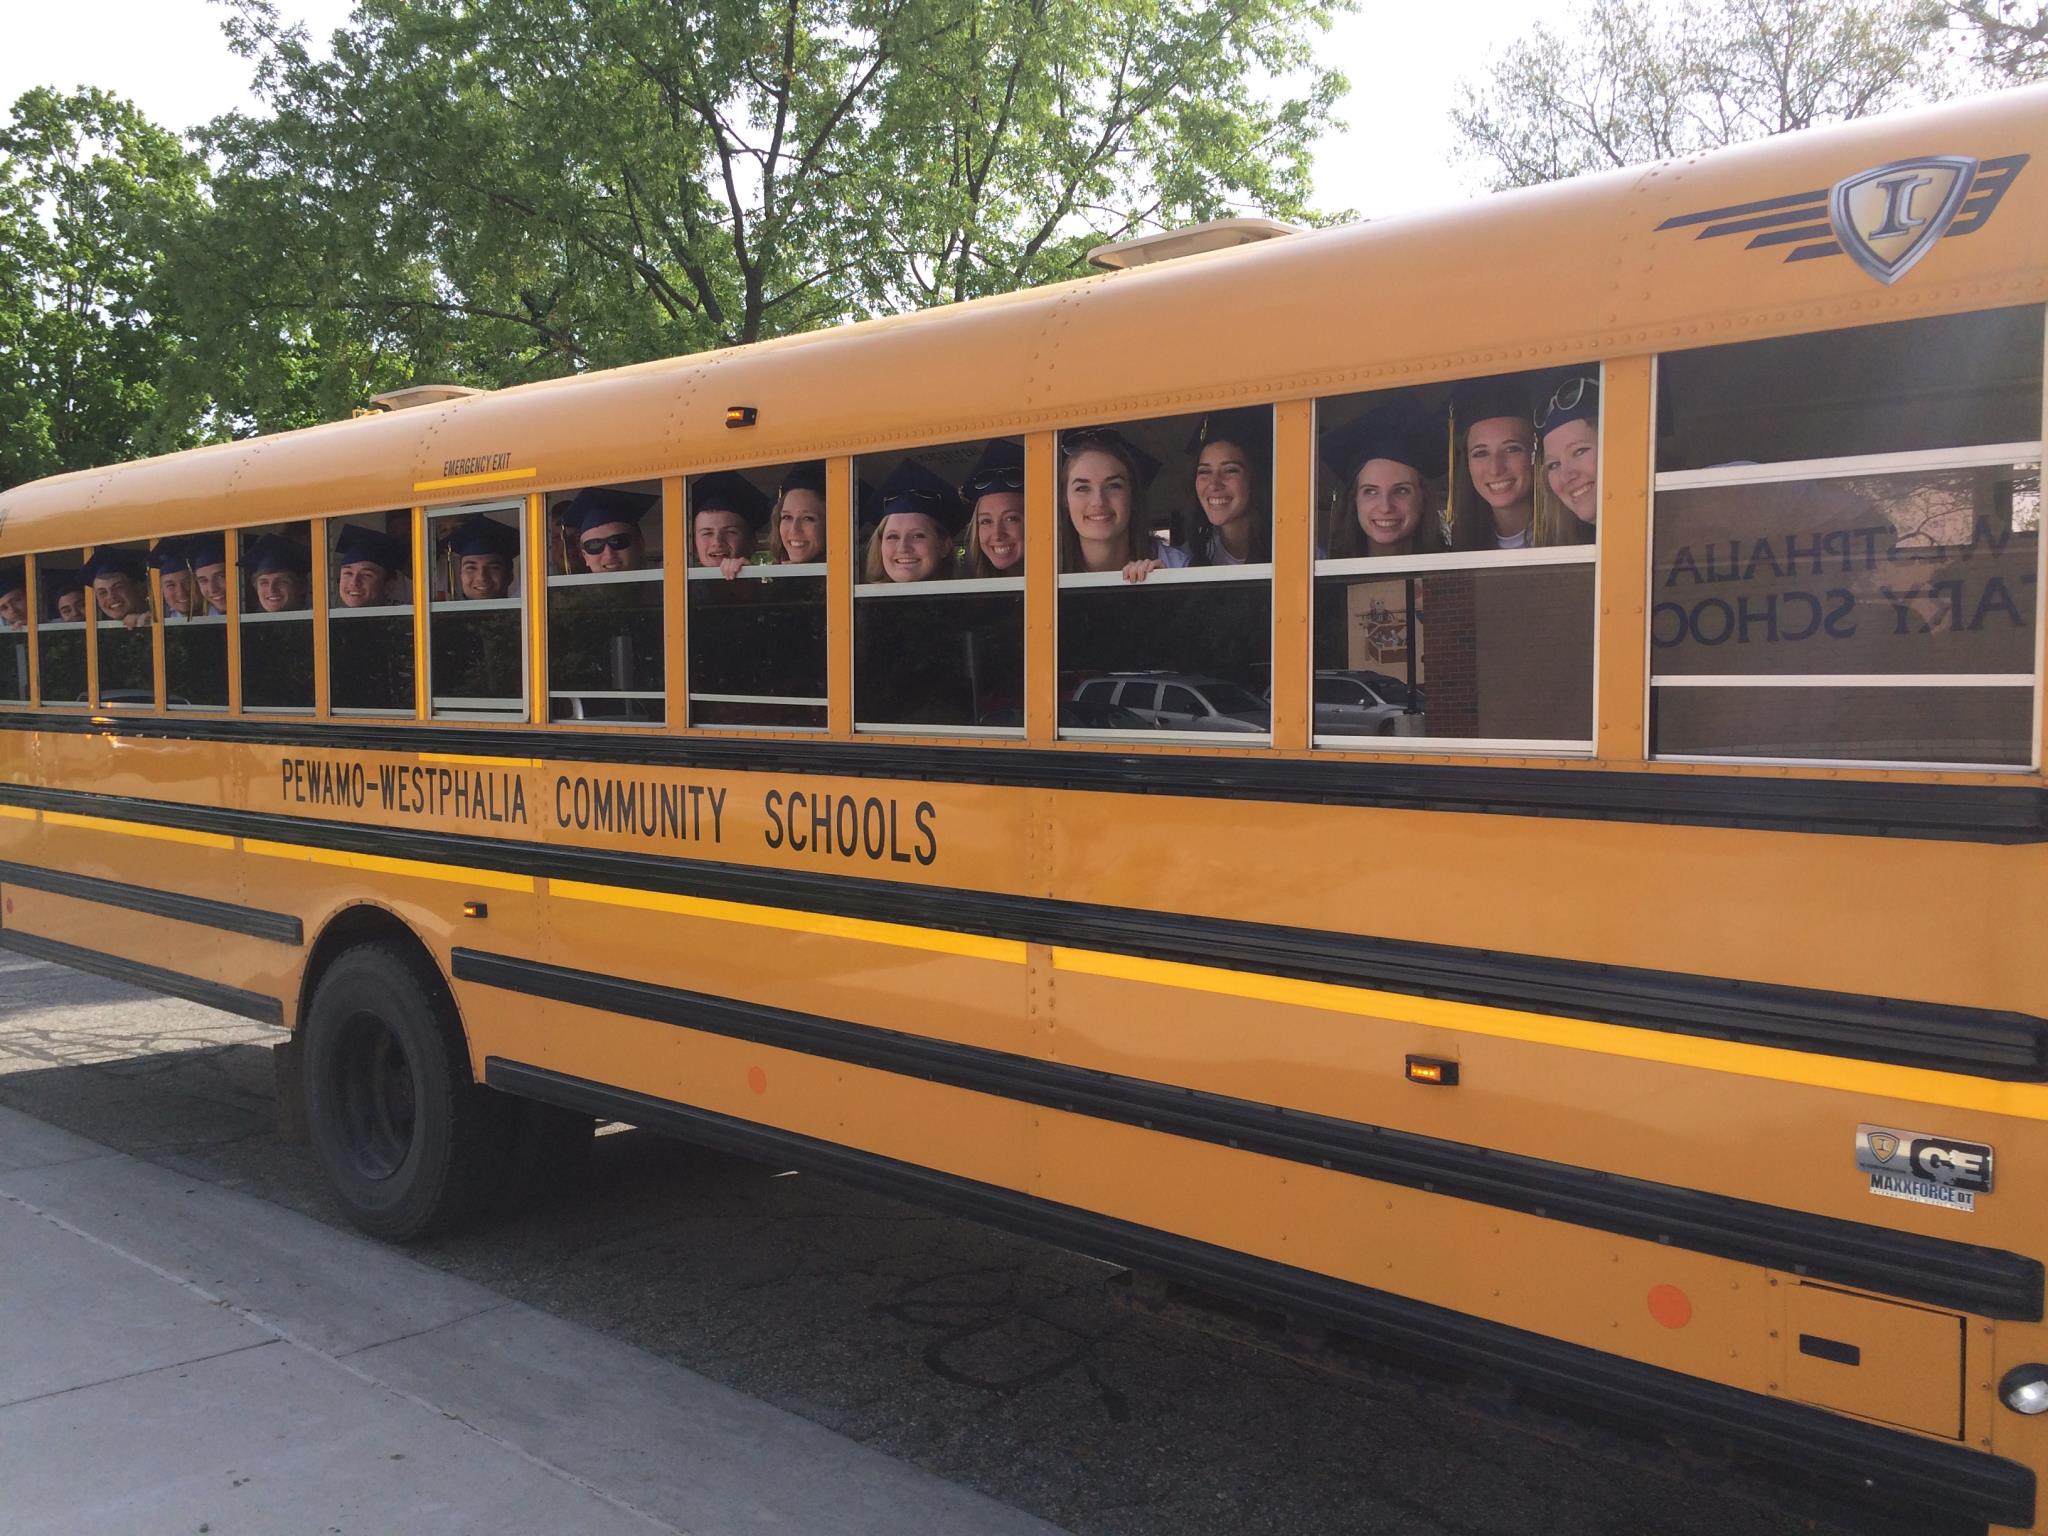 The Class of 2017 gather on a bus after visiting Pewamo Elementary School on their last day as PW students.